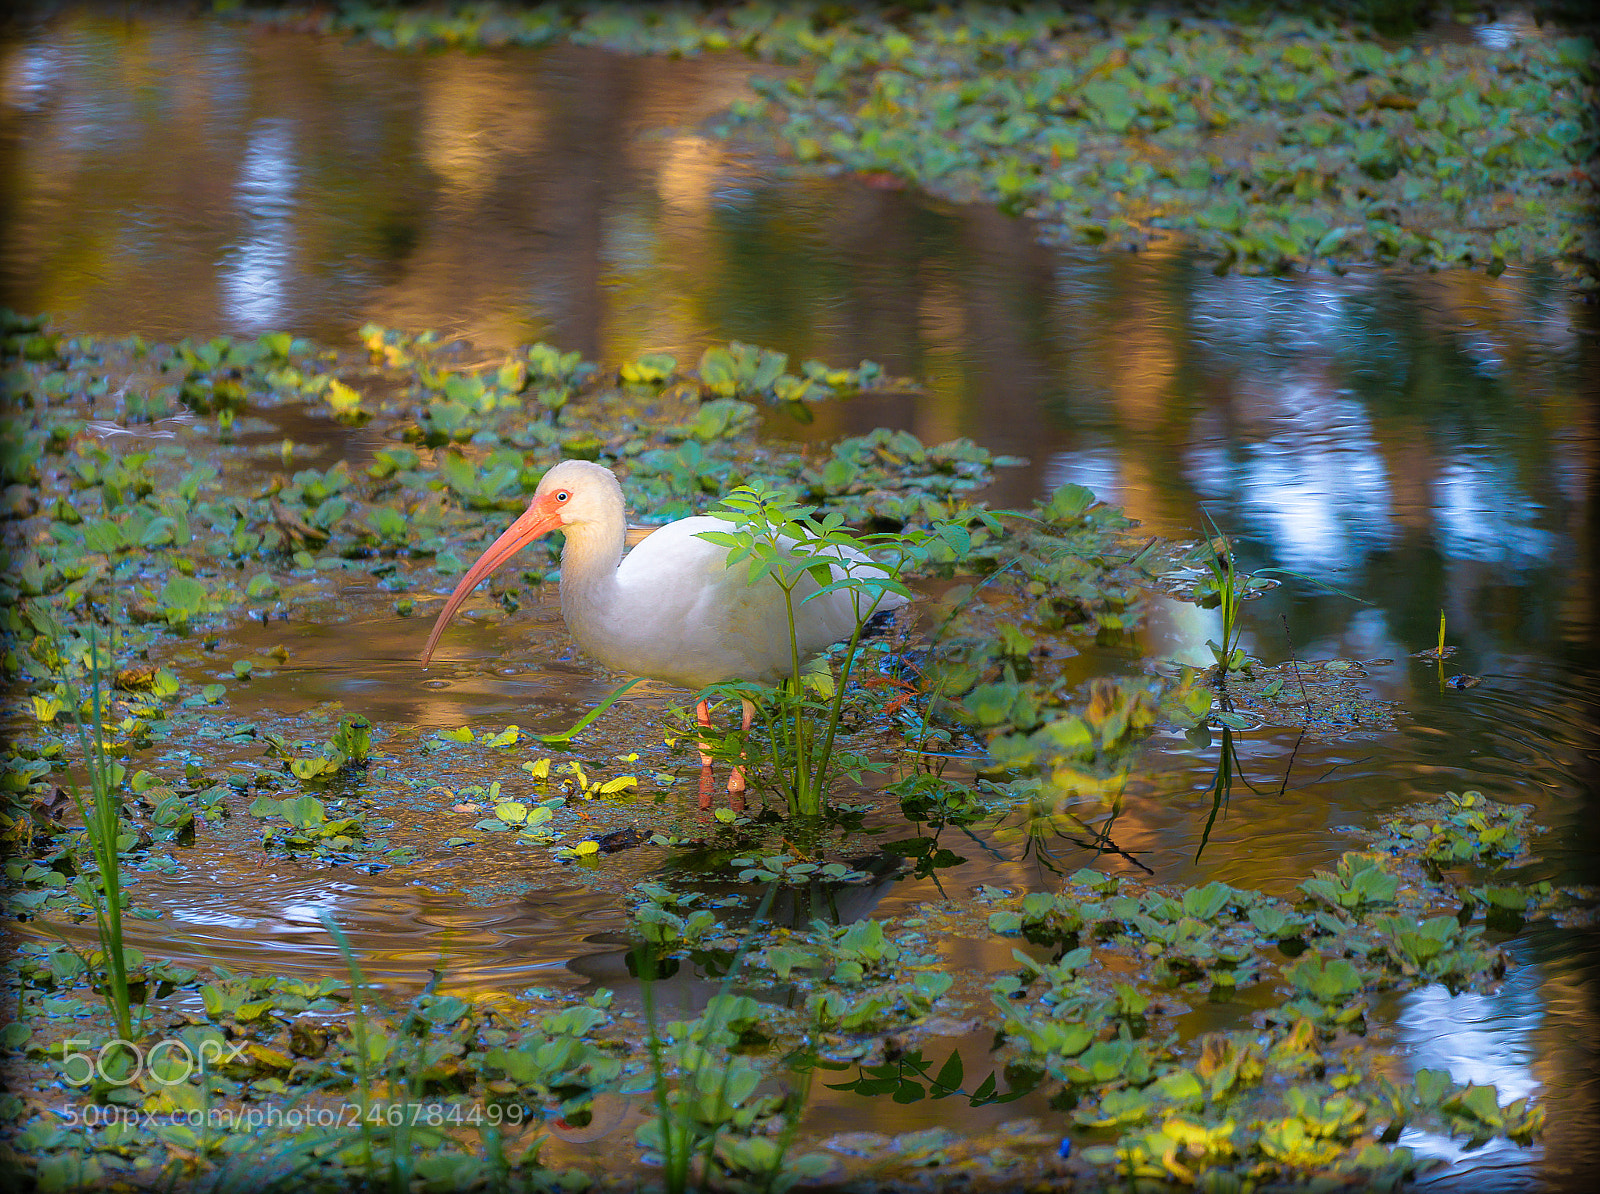 Sony a7 sample photo. Ibis in the sanctuary photography